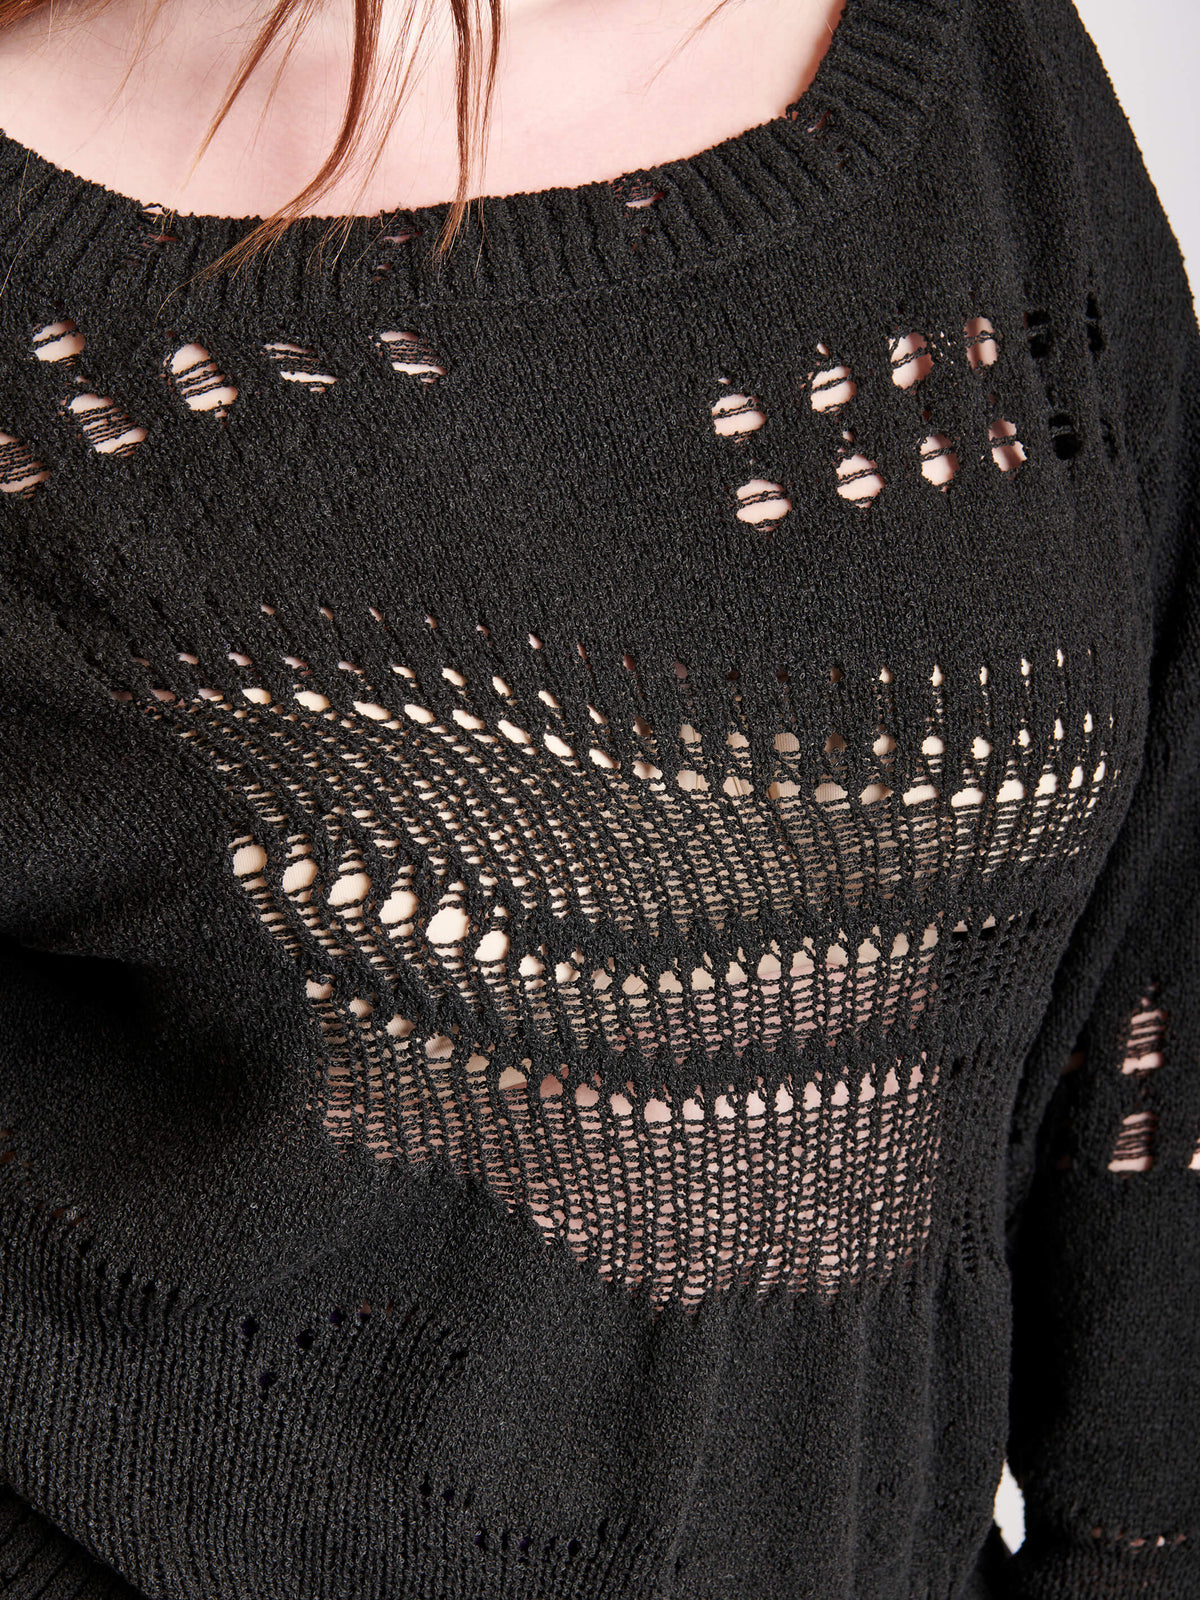 Black Sweater with drop stitch details